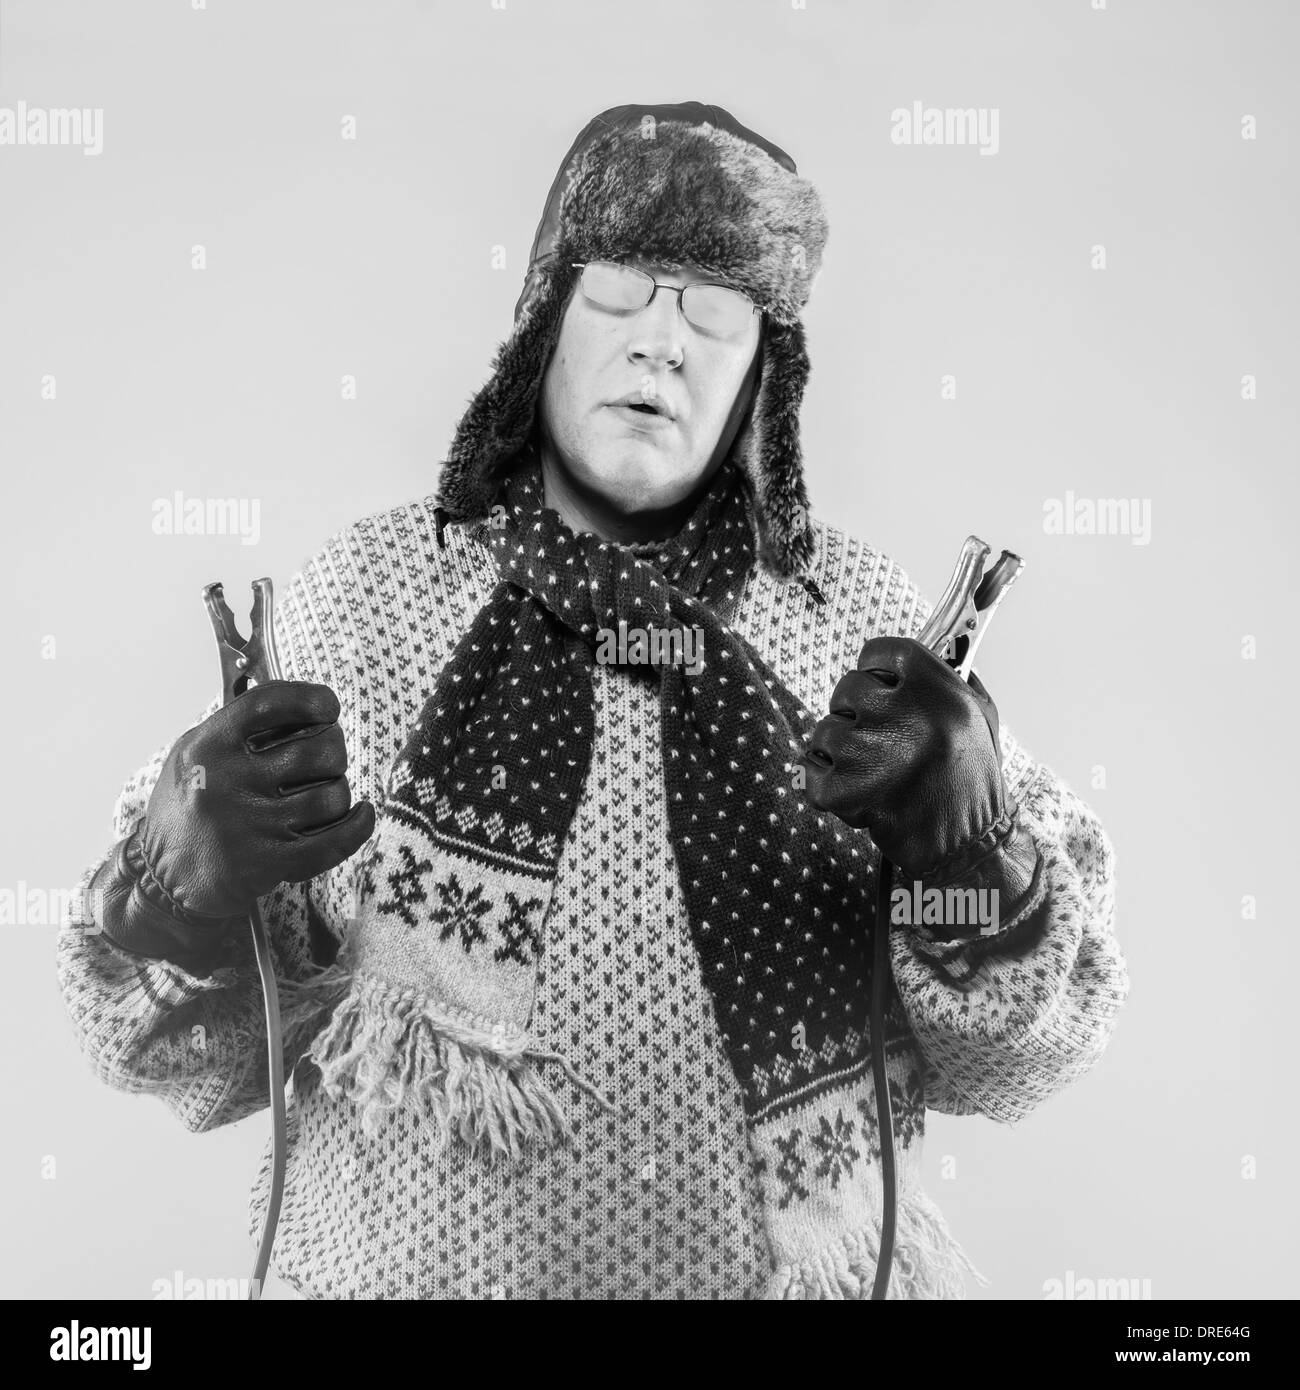 Frozen man with the jumper cables, black and white image Stock Photo